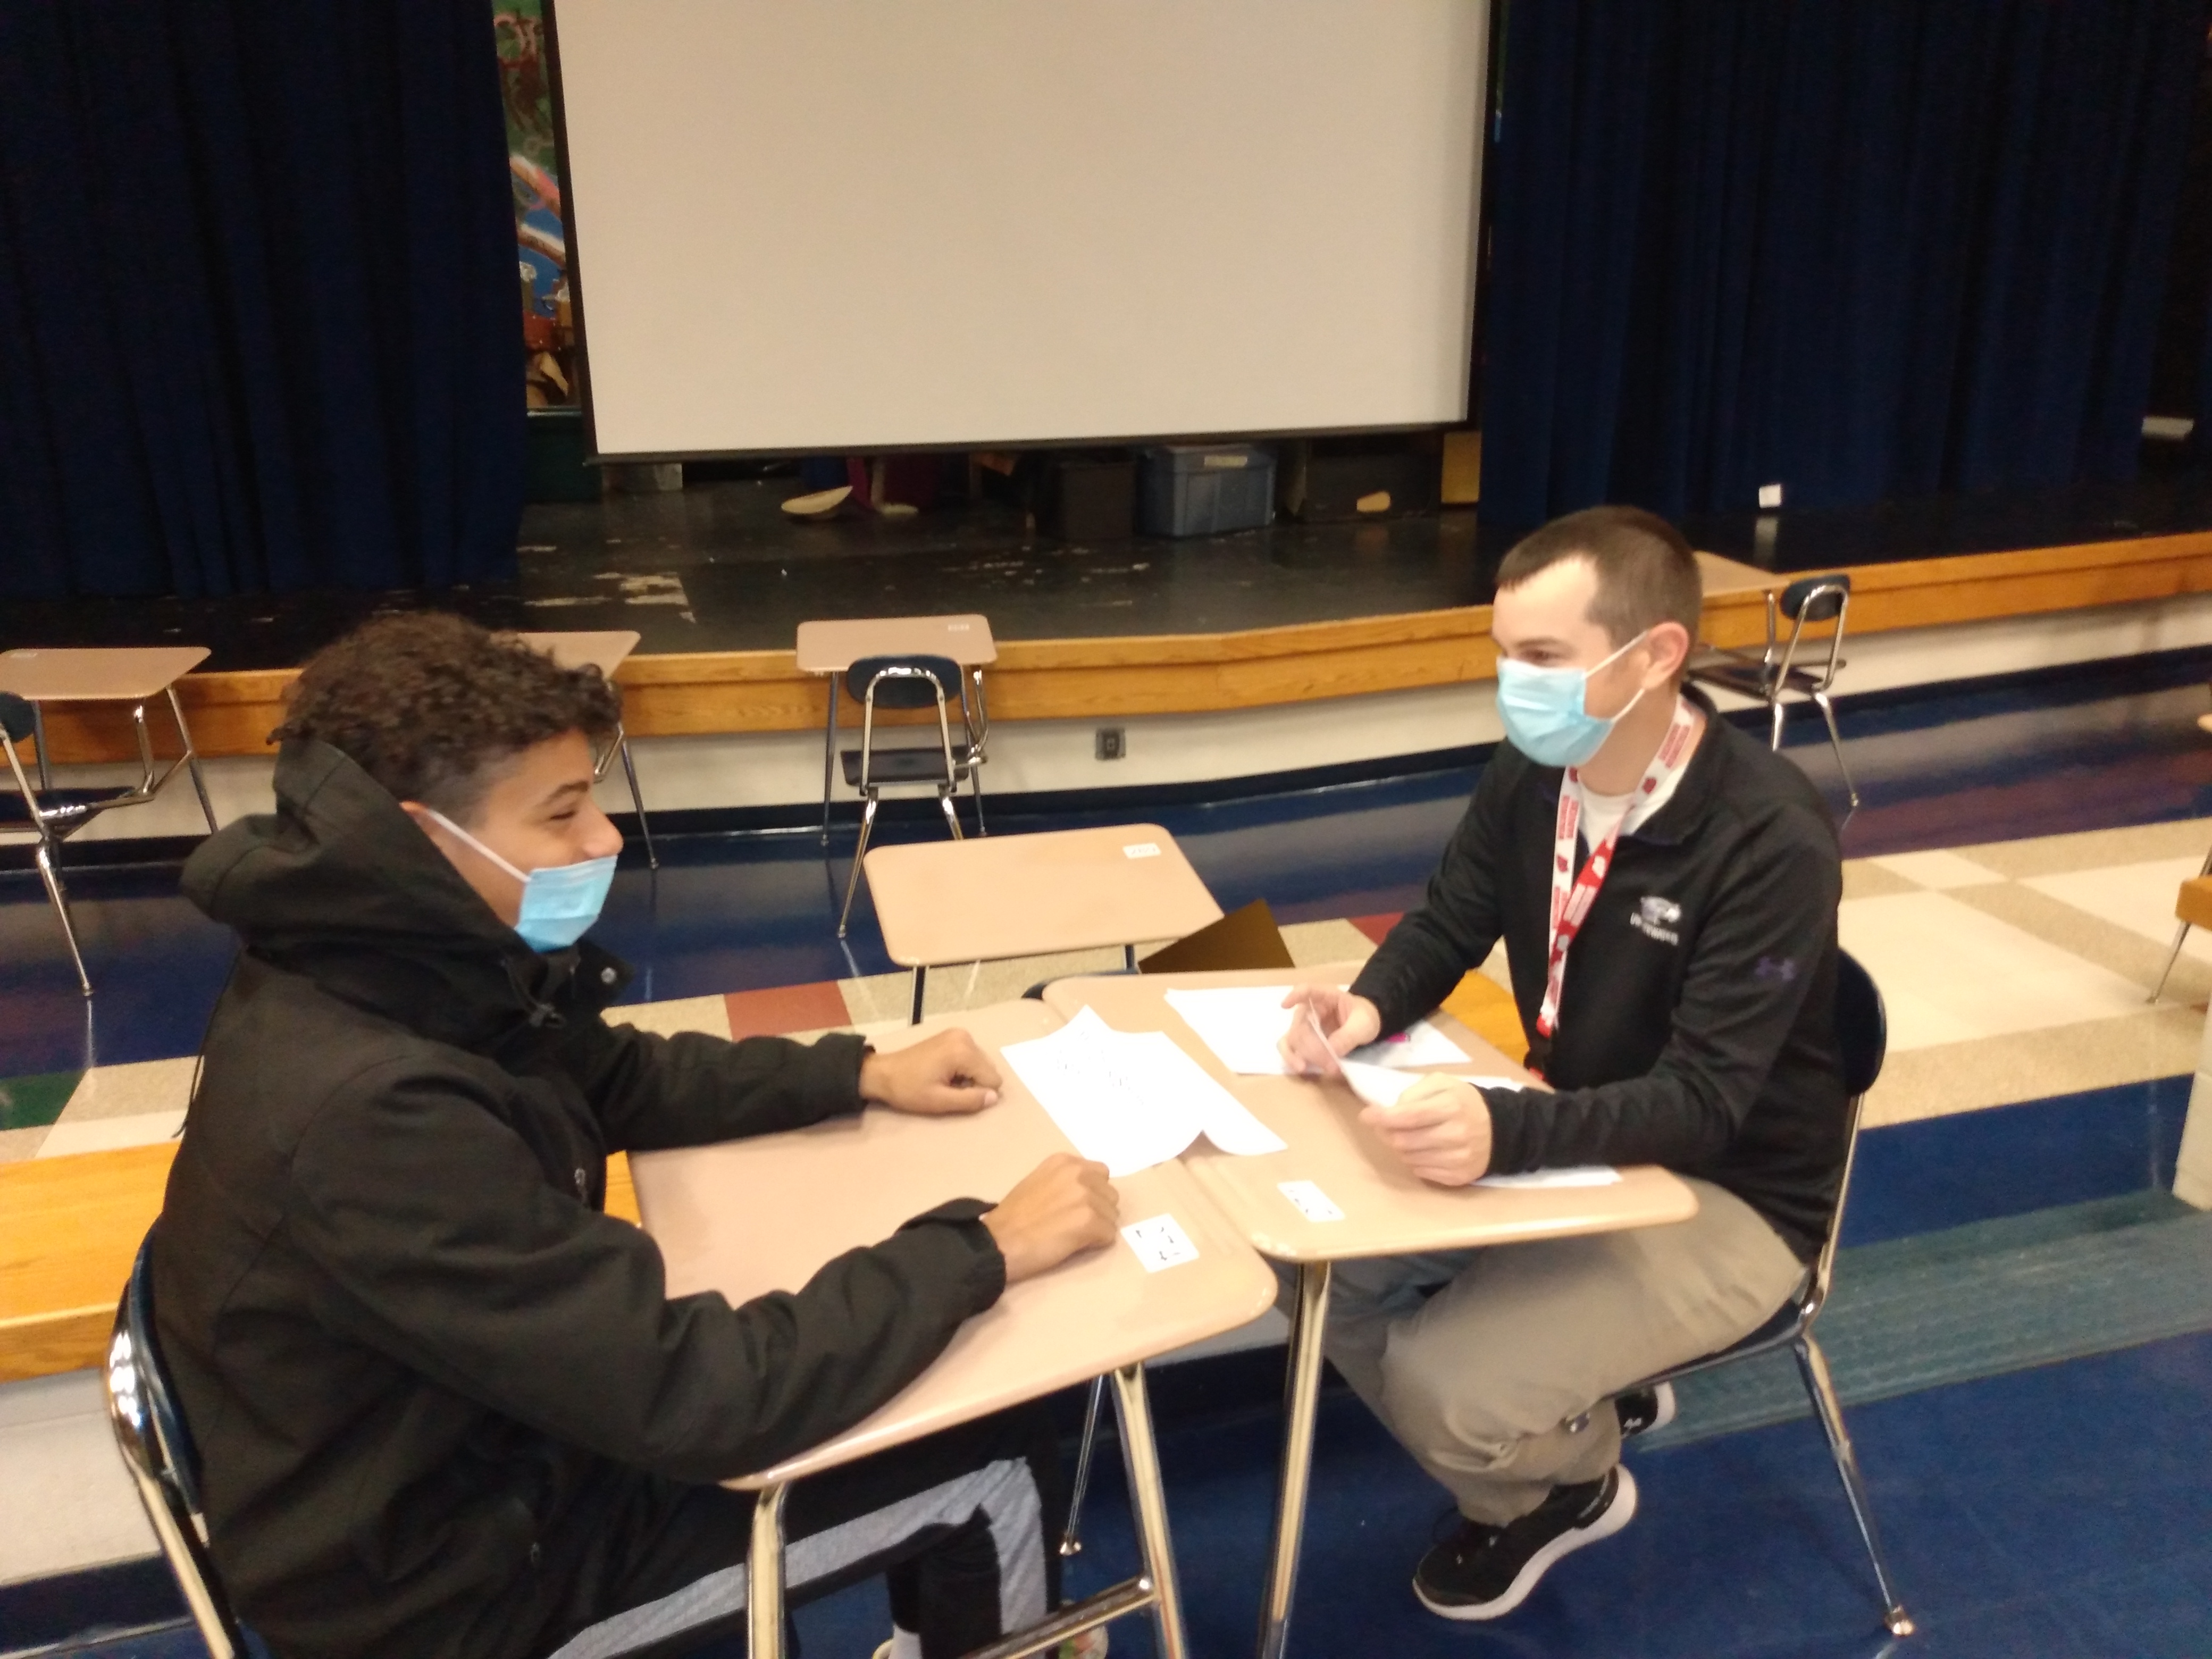 mock interviews with student and staff